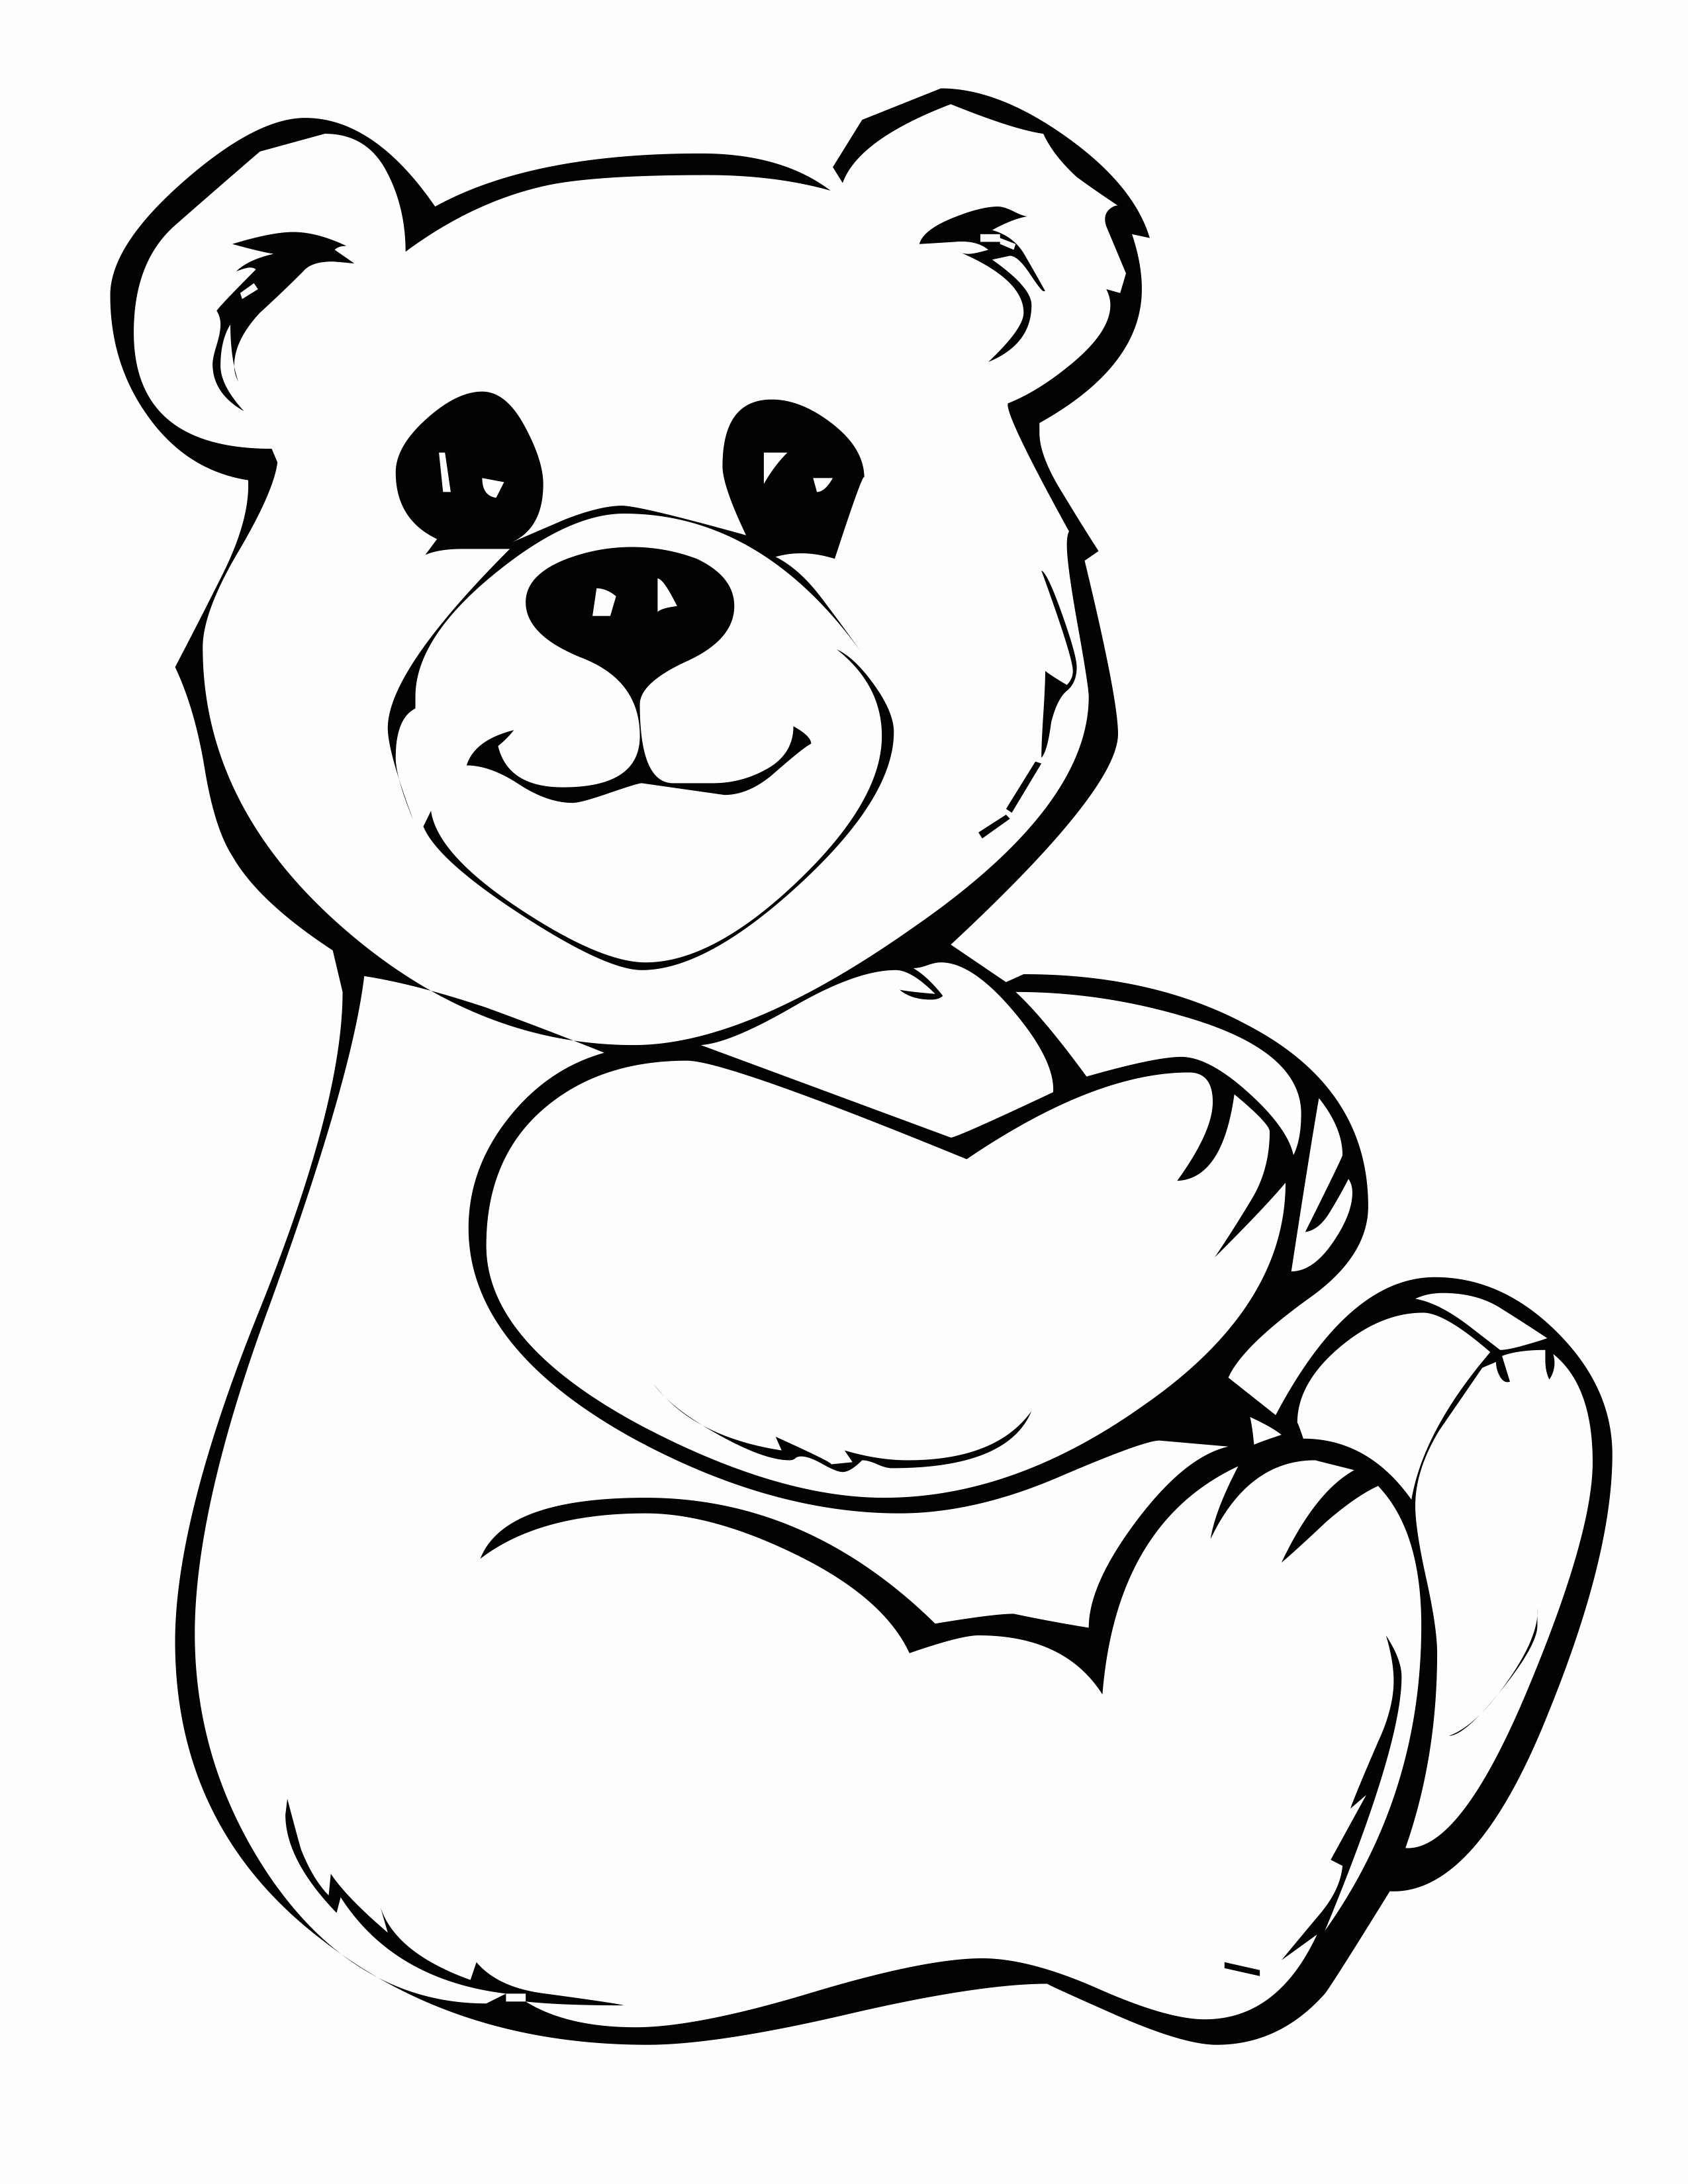 Free Coloring Pages Teddy Bear Download Free Coloring Pages Teddy Bear